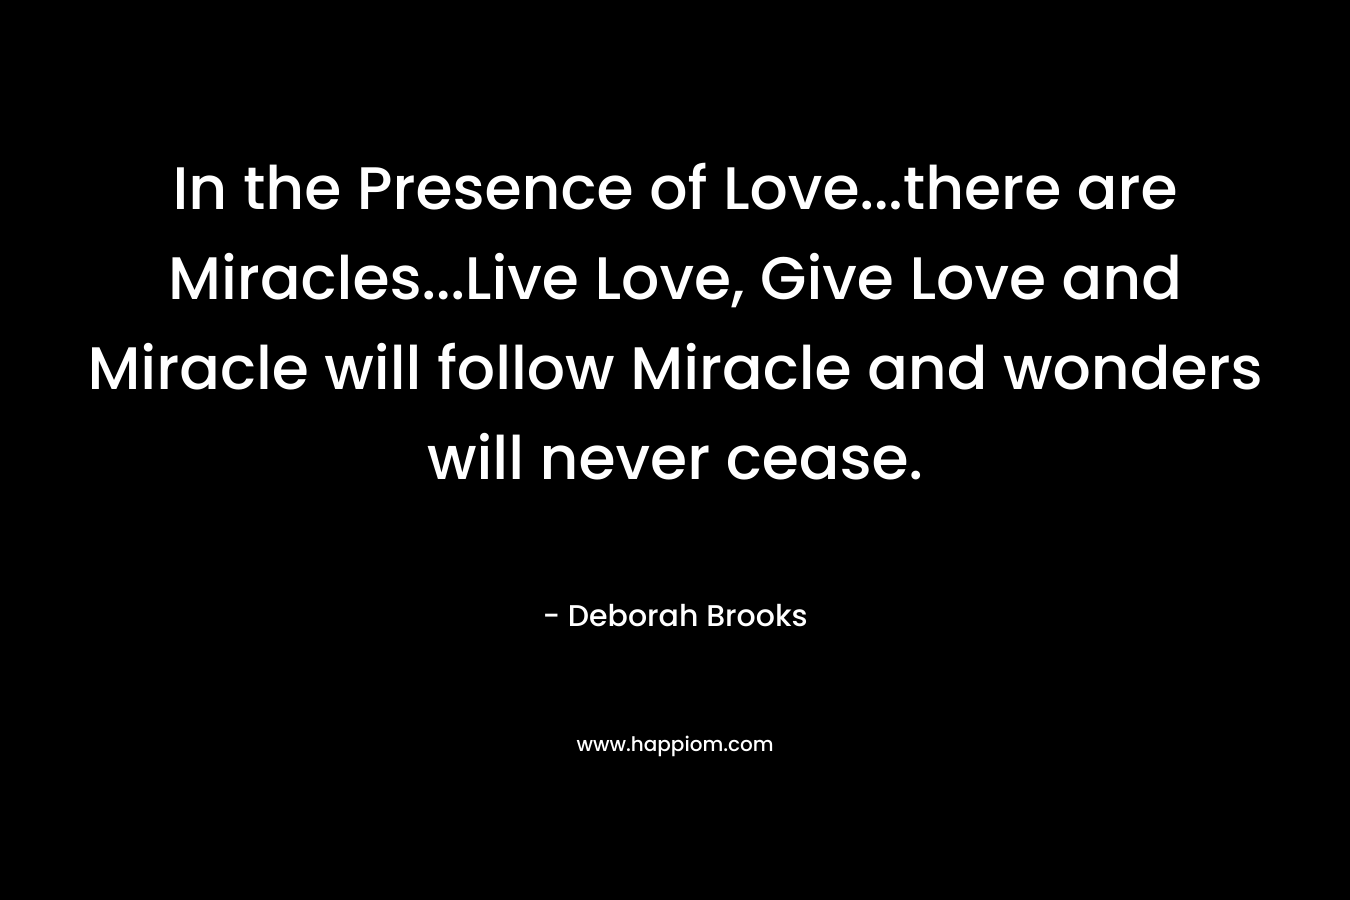 In the Presence of Love...there are Miracles...Live Love, Give Love and Miracle will follow Miracle and wonders will never cease.